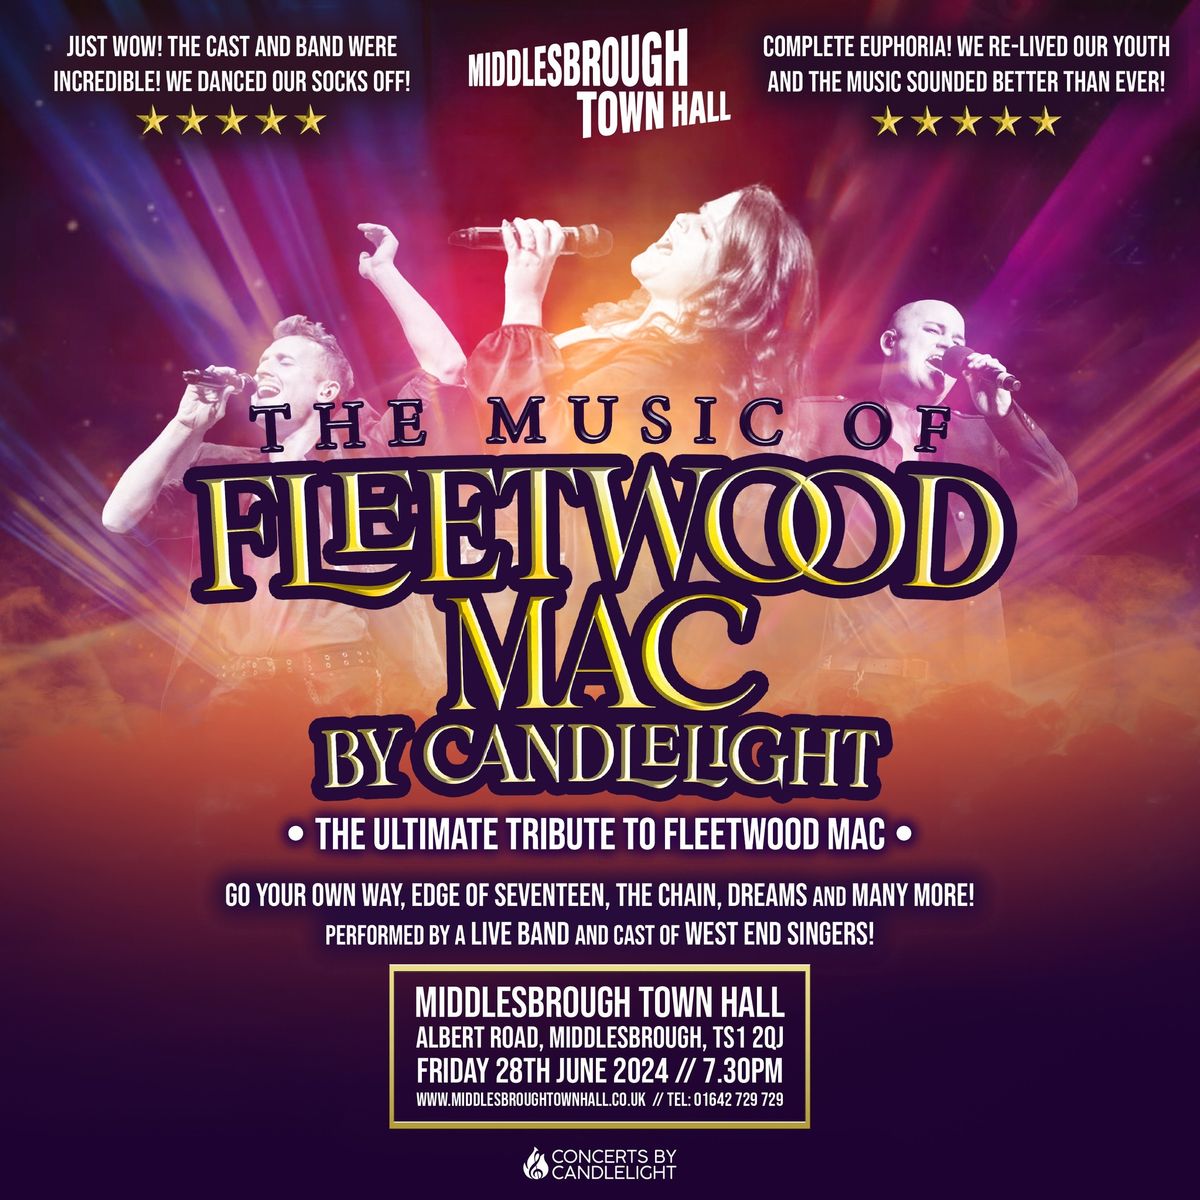 The Music Of Fleetwood Mac By Candlelight At Middlesbrough Town Hall